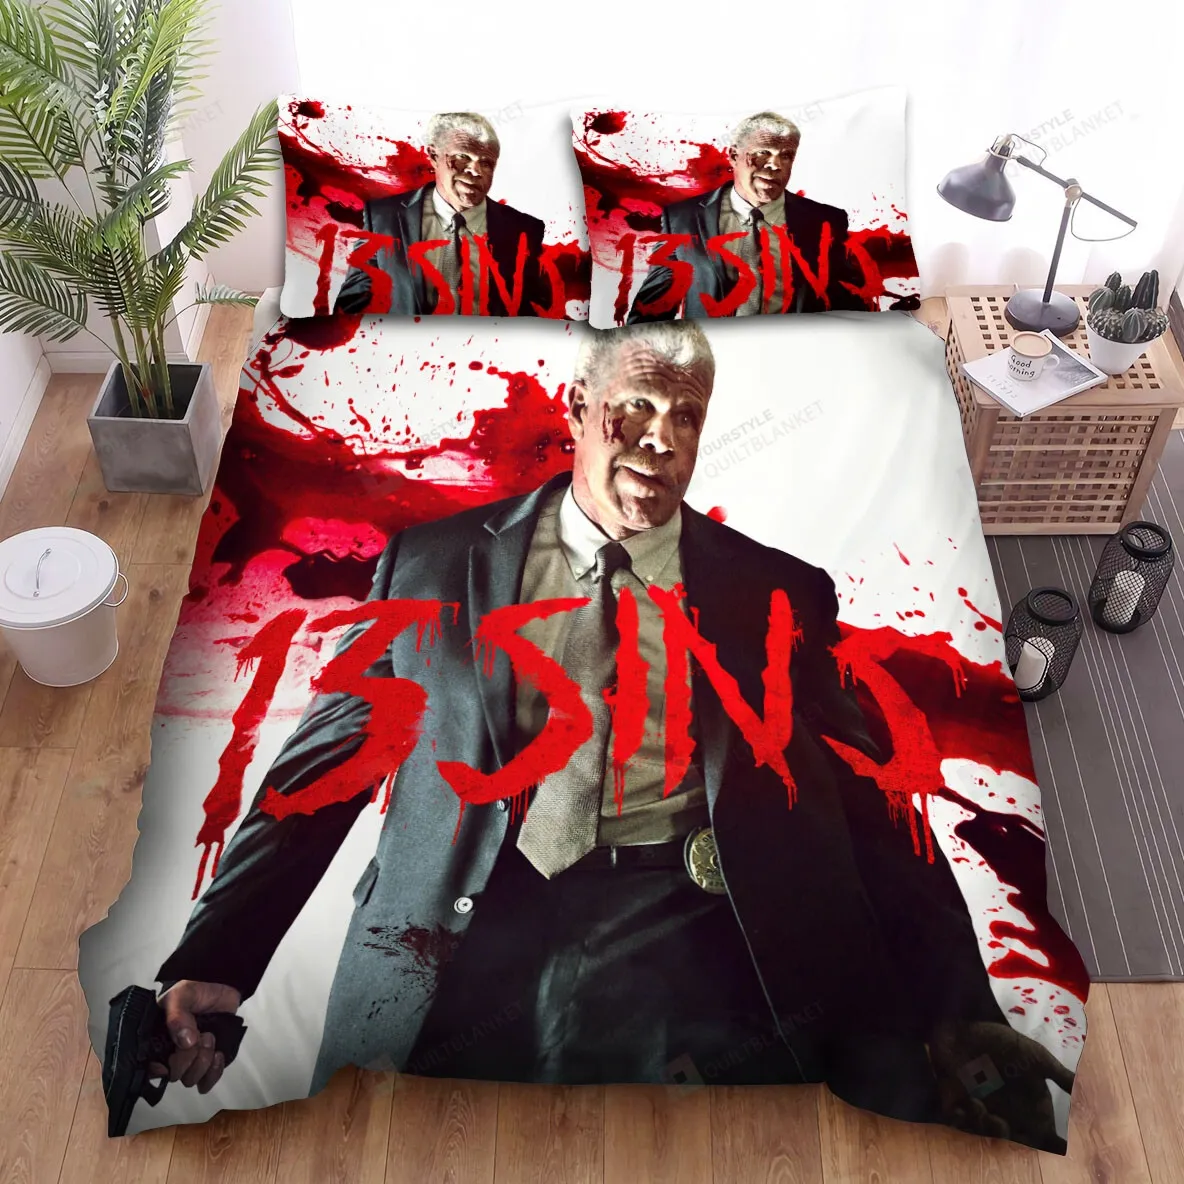 13 Sins The Men With Gun On Hand And Blood Movie Poster Bed Sheets Spread Comforter Duvet Cover Bedding Sets